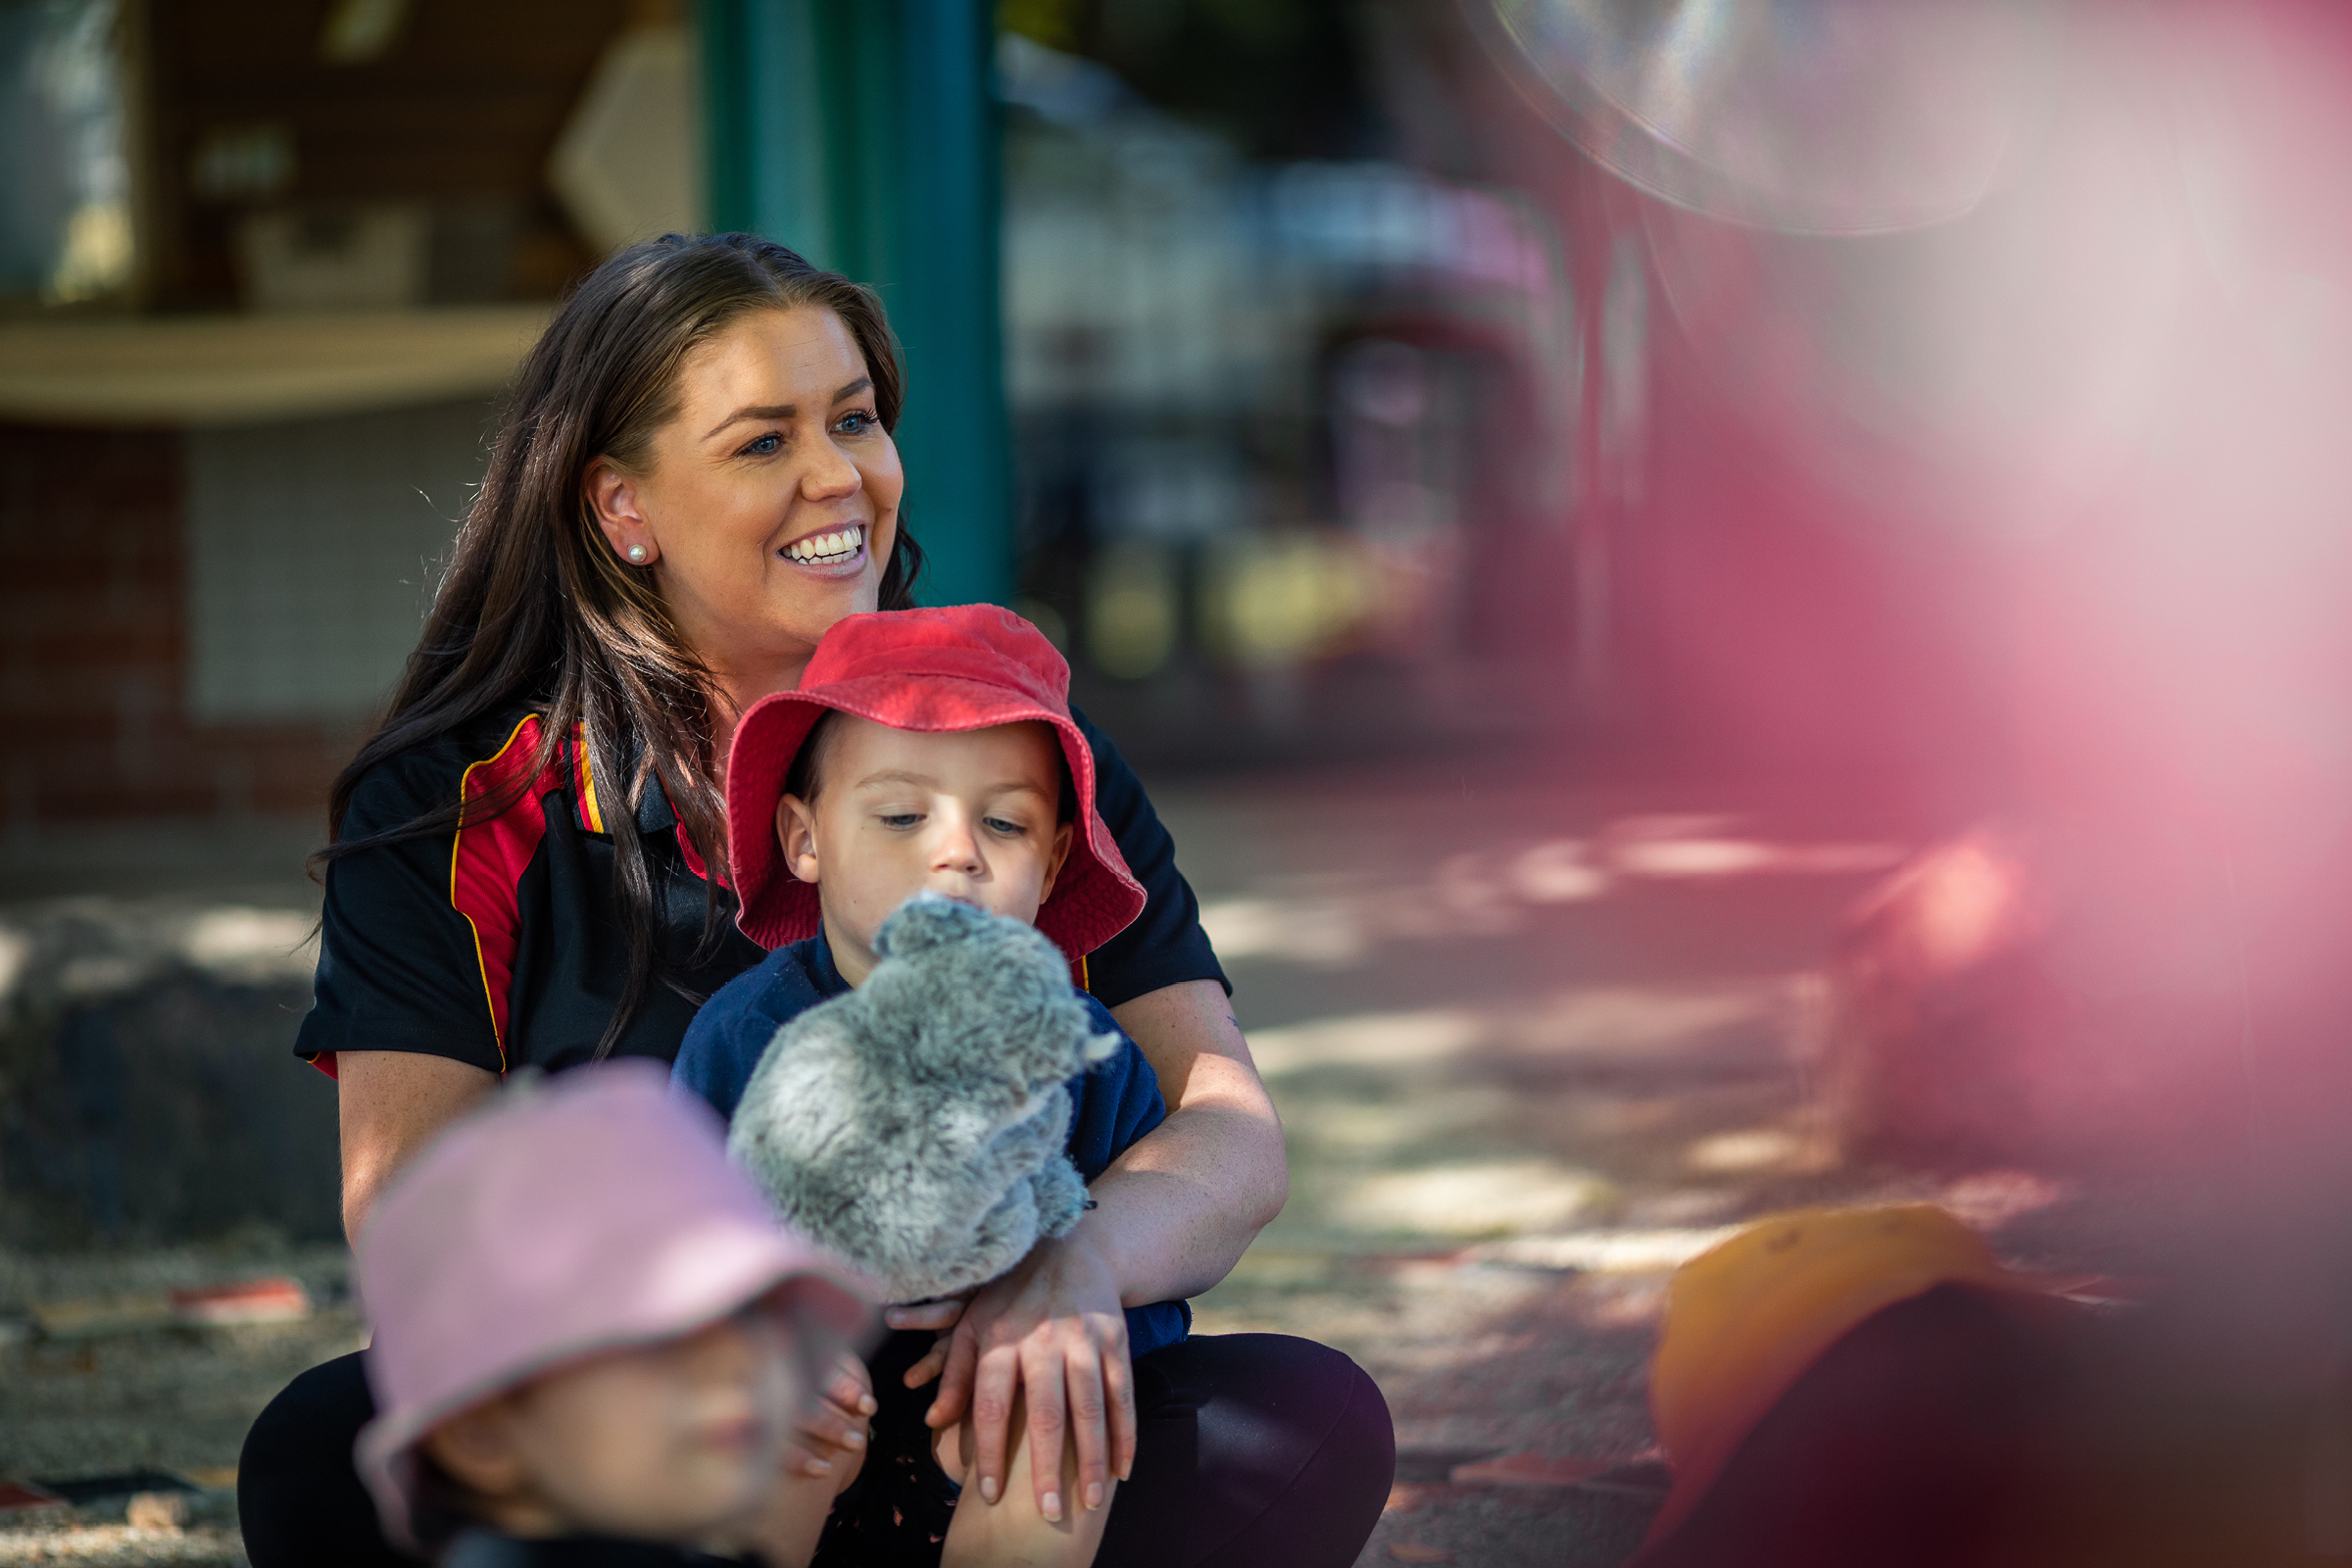 Courtney Glazebrook at Towri Multifunctional Aboriginal Children’s Service, an Indigenous education provider, with a preschooler.